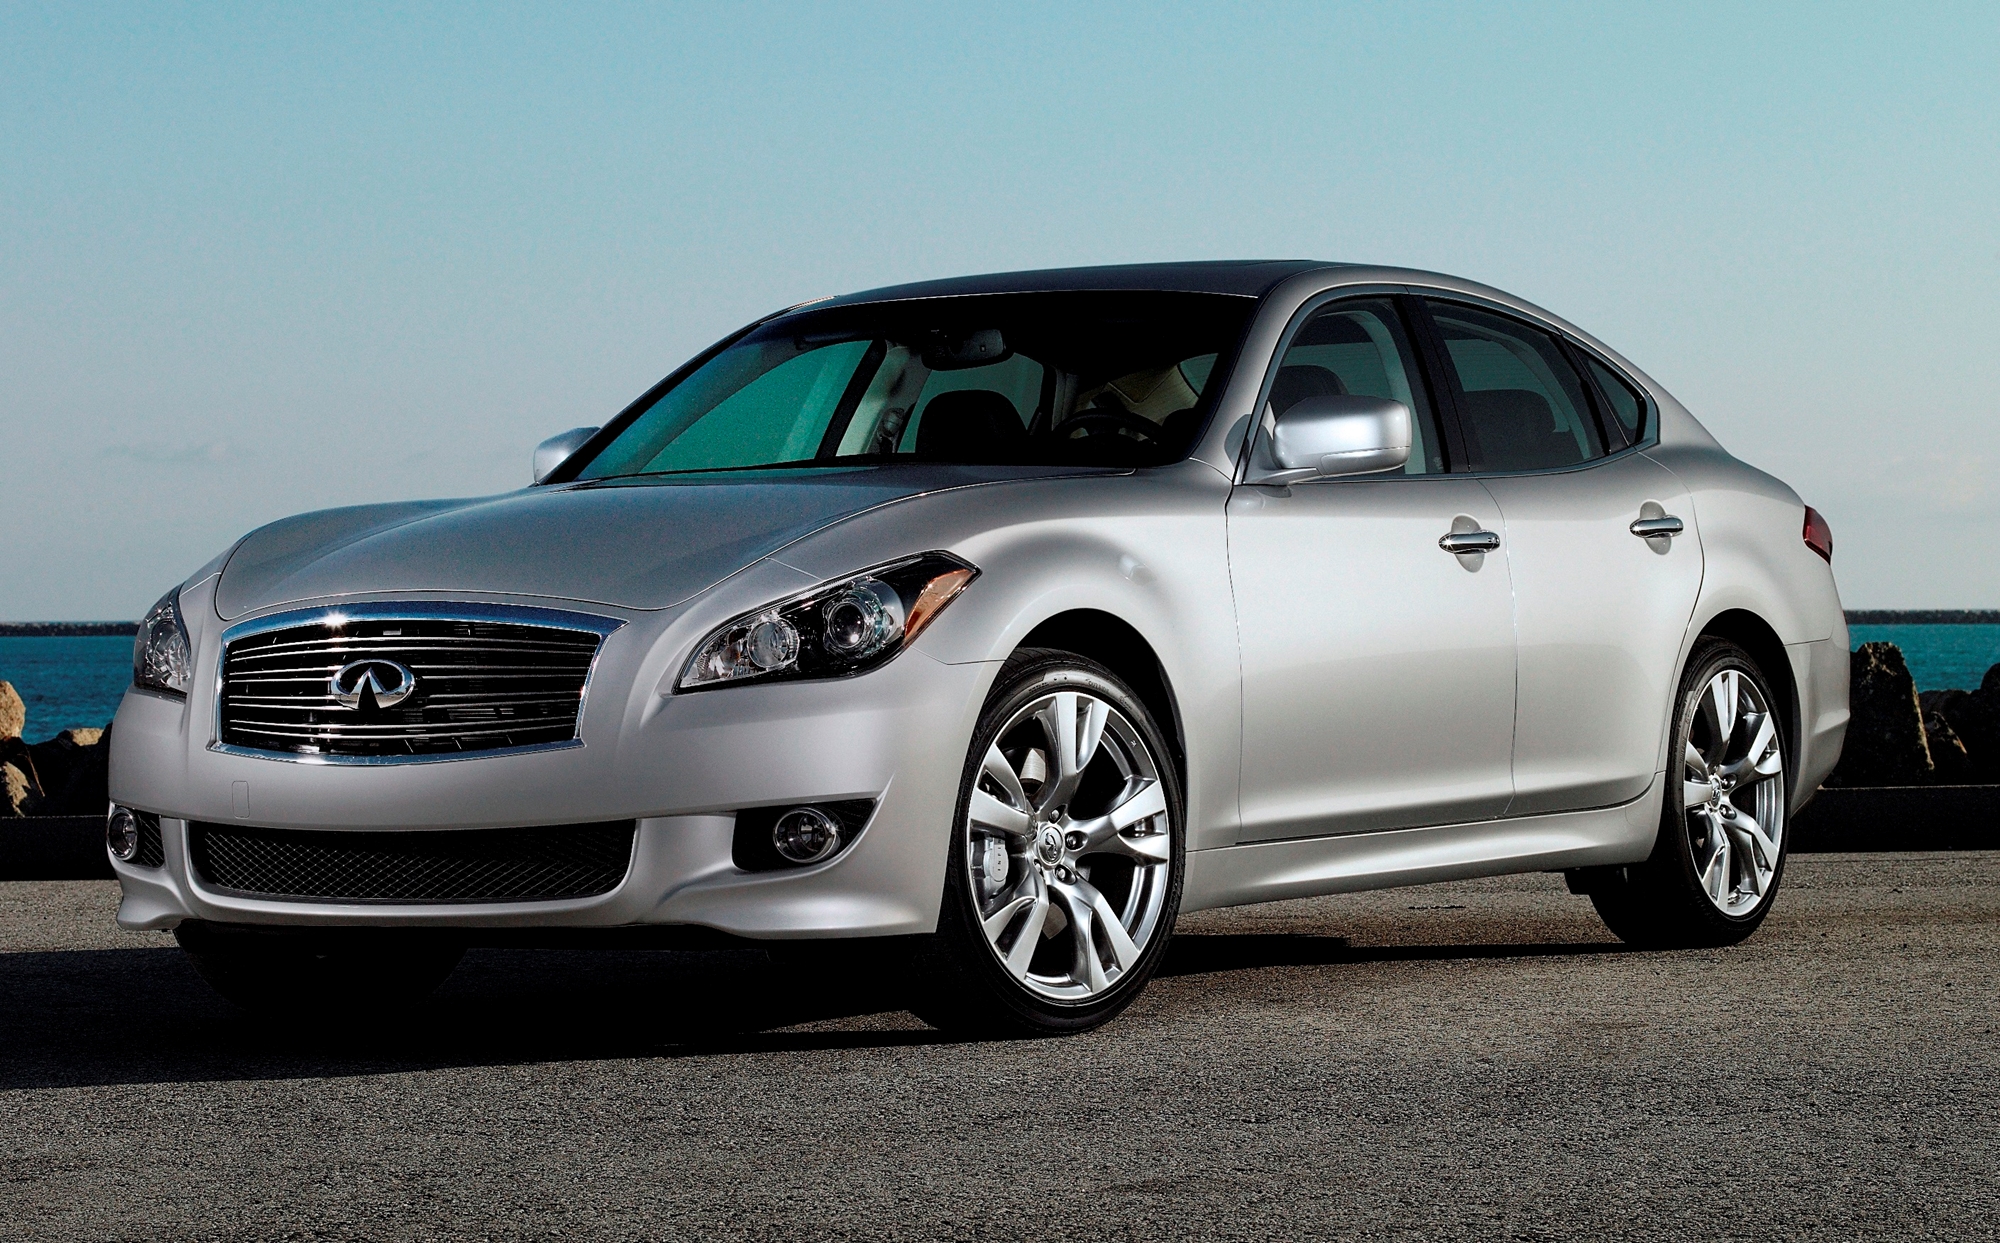 2013 Infiniti M37x Full Specs, Features and Price | CarBuzz